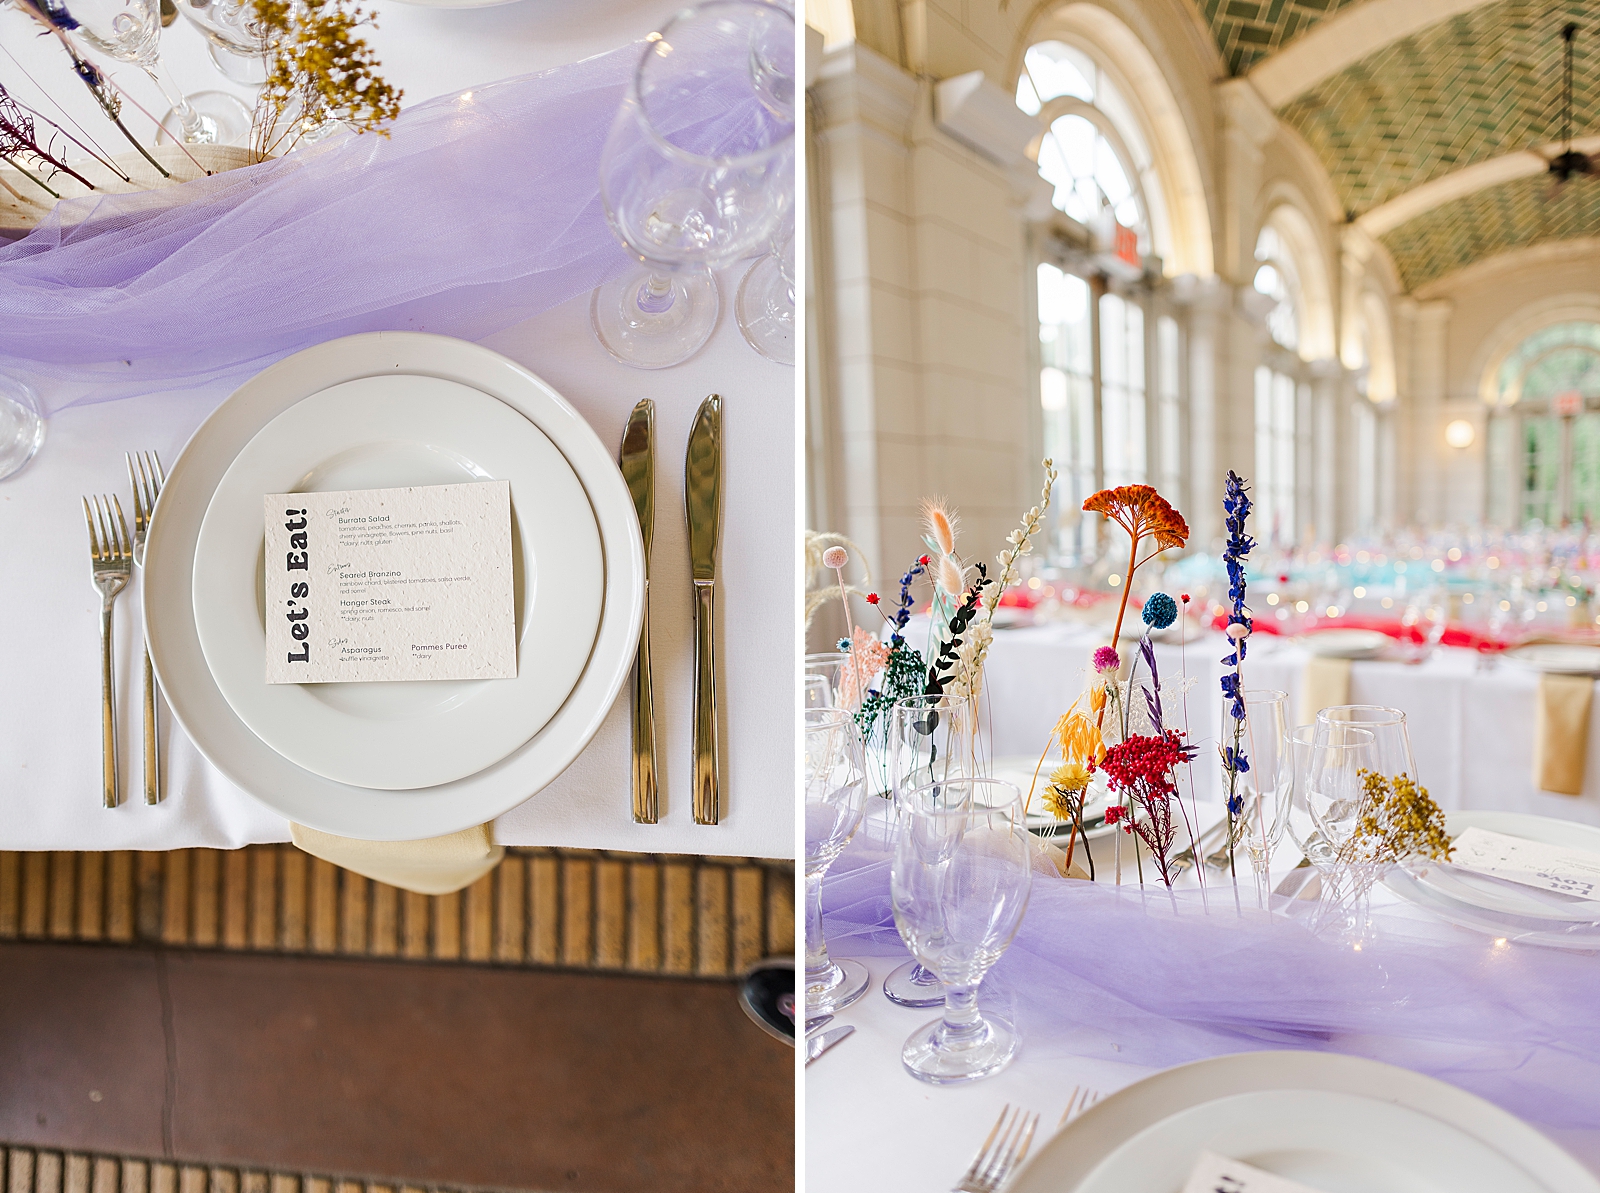 Left: Shot of a place setting for the wedding reception. 
Right: Shot of reception tables and colorful floral arrangements. 